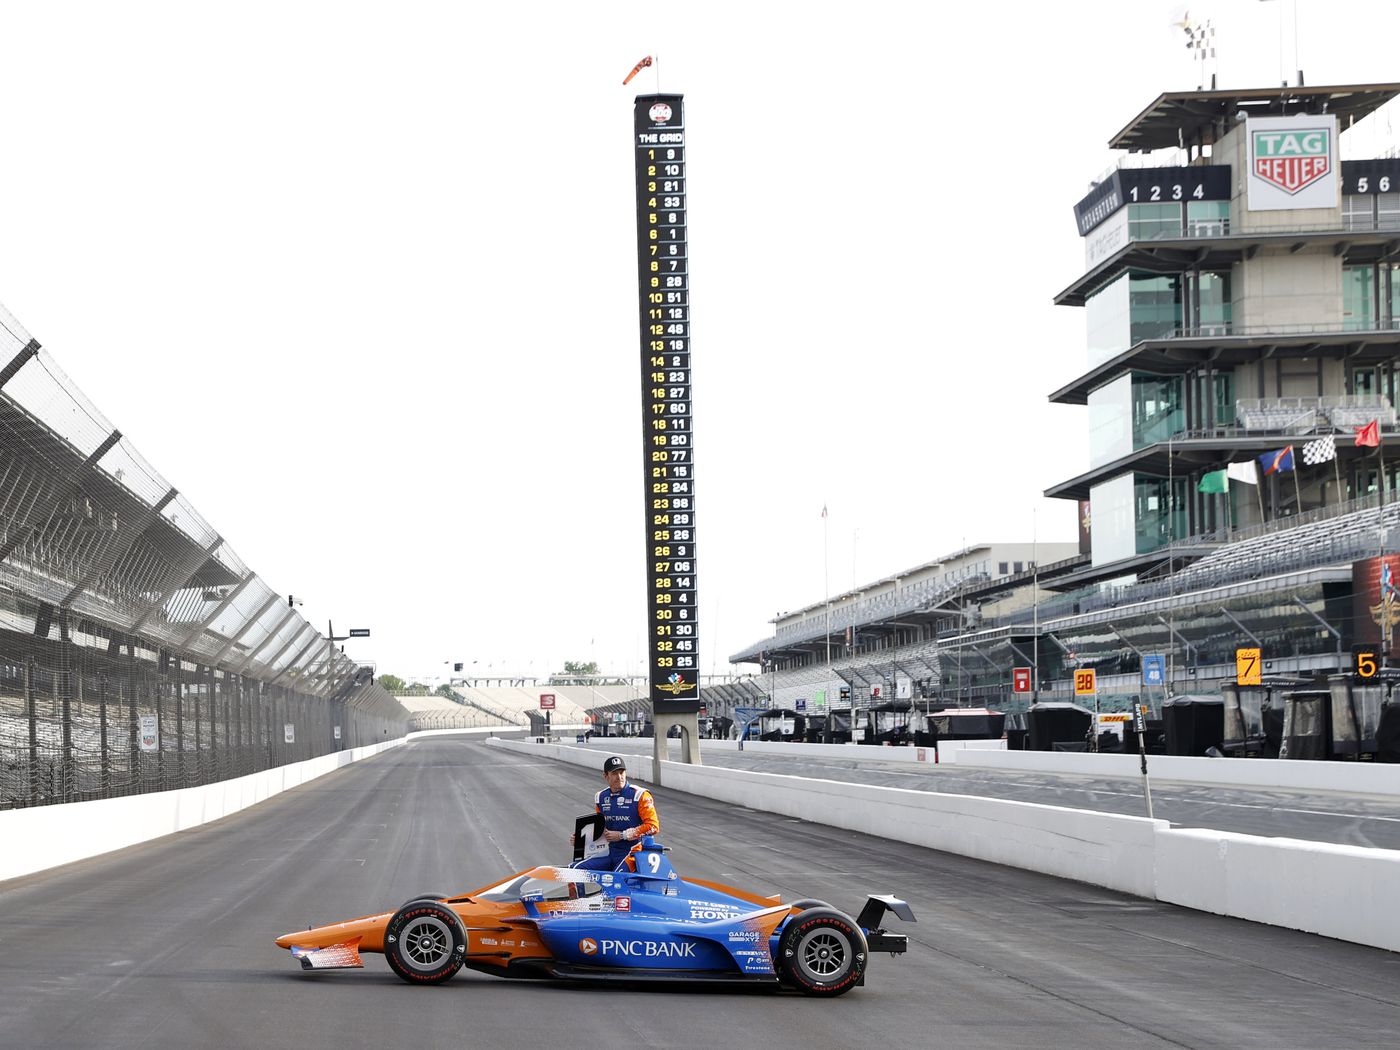 Indy 500 results: Winner, full finishing order at Indianapolis Motor Speedway